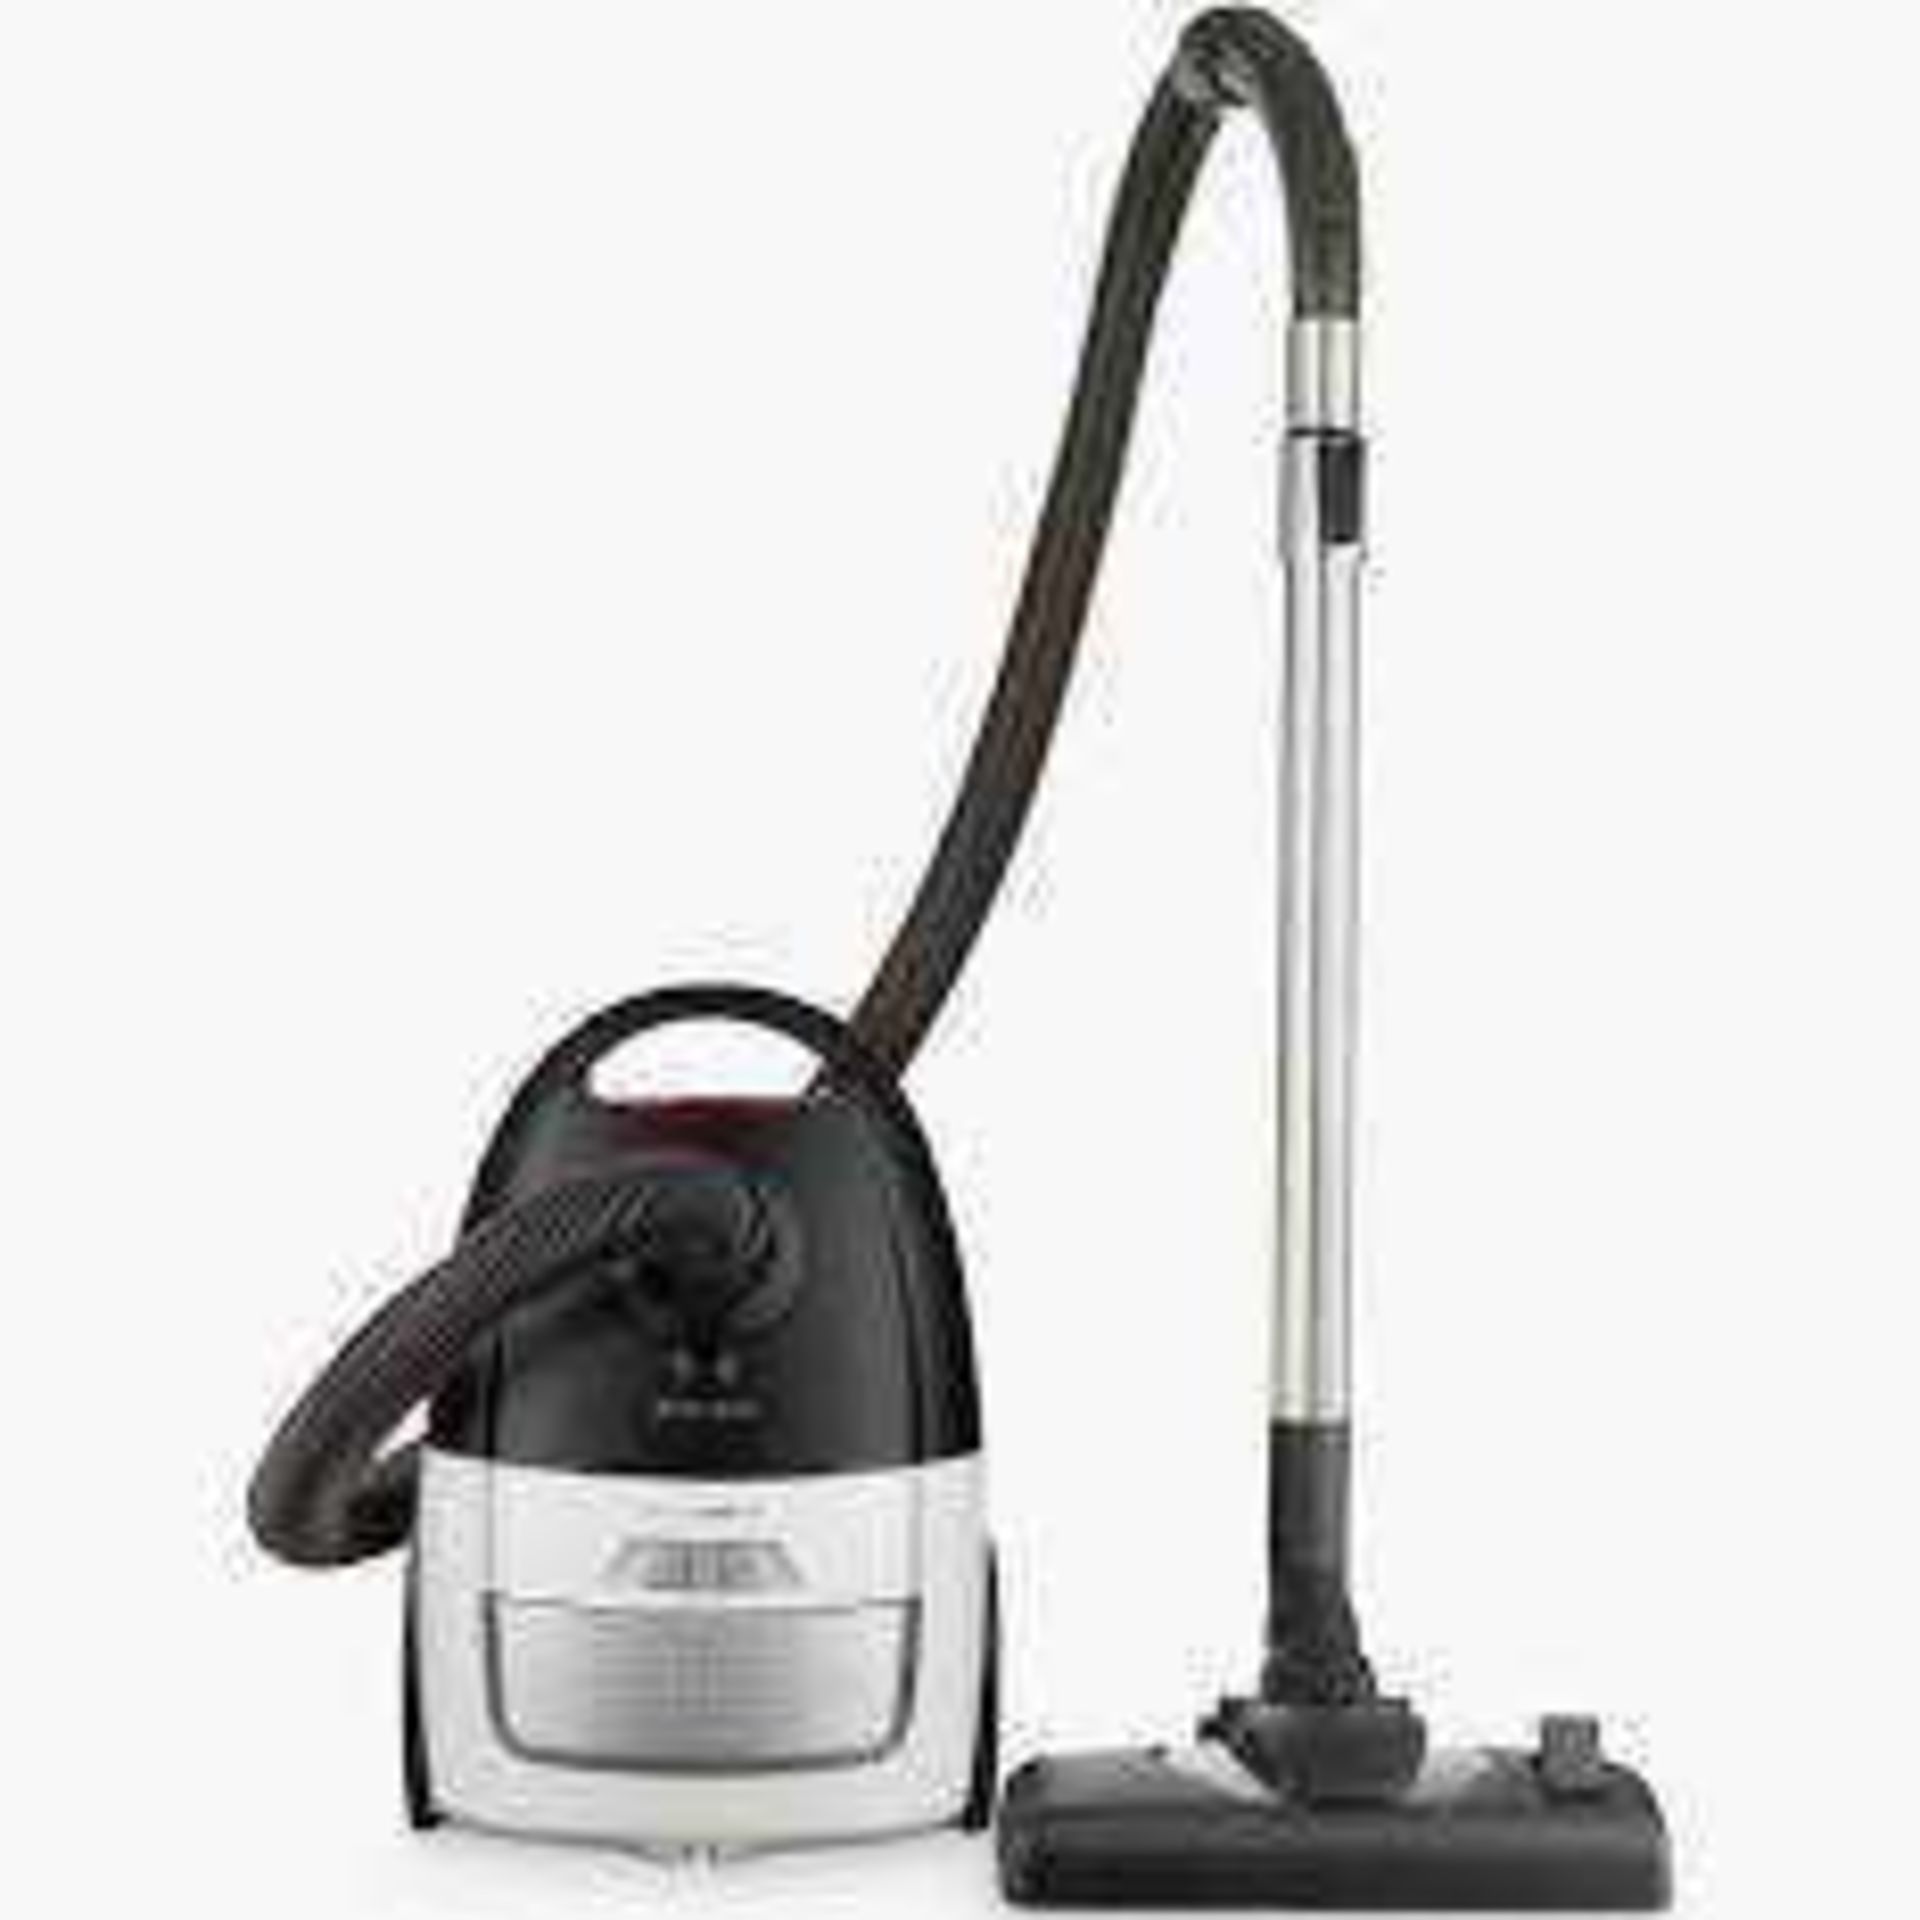 Combined RRP £140 Lot To Contain Two Boxed John Lewis 1.5L Vacuum Cleaners - Image 2 of 2